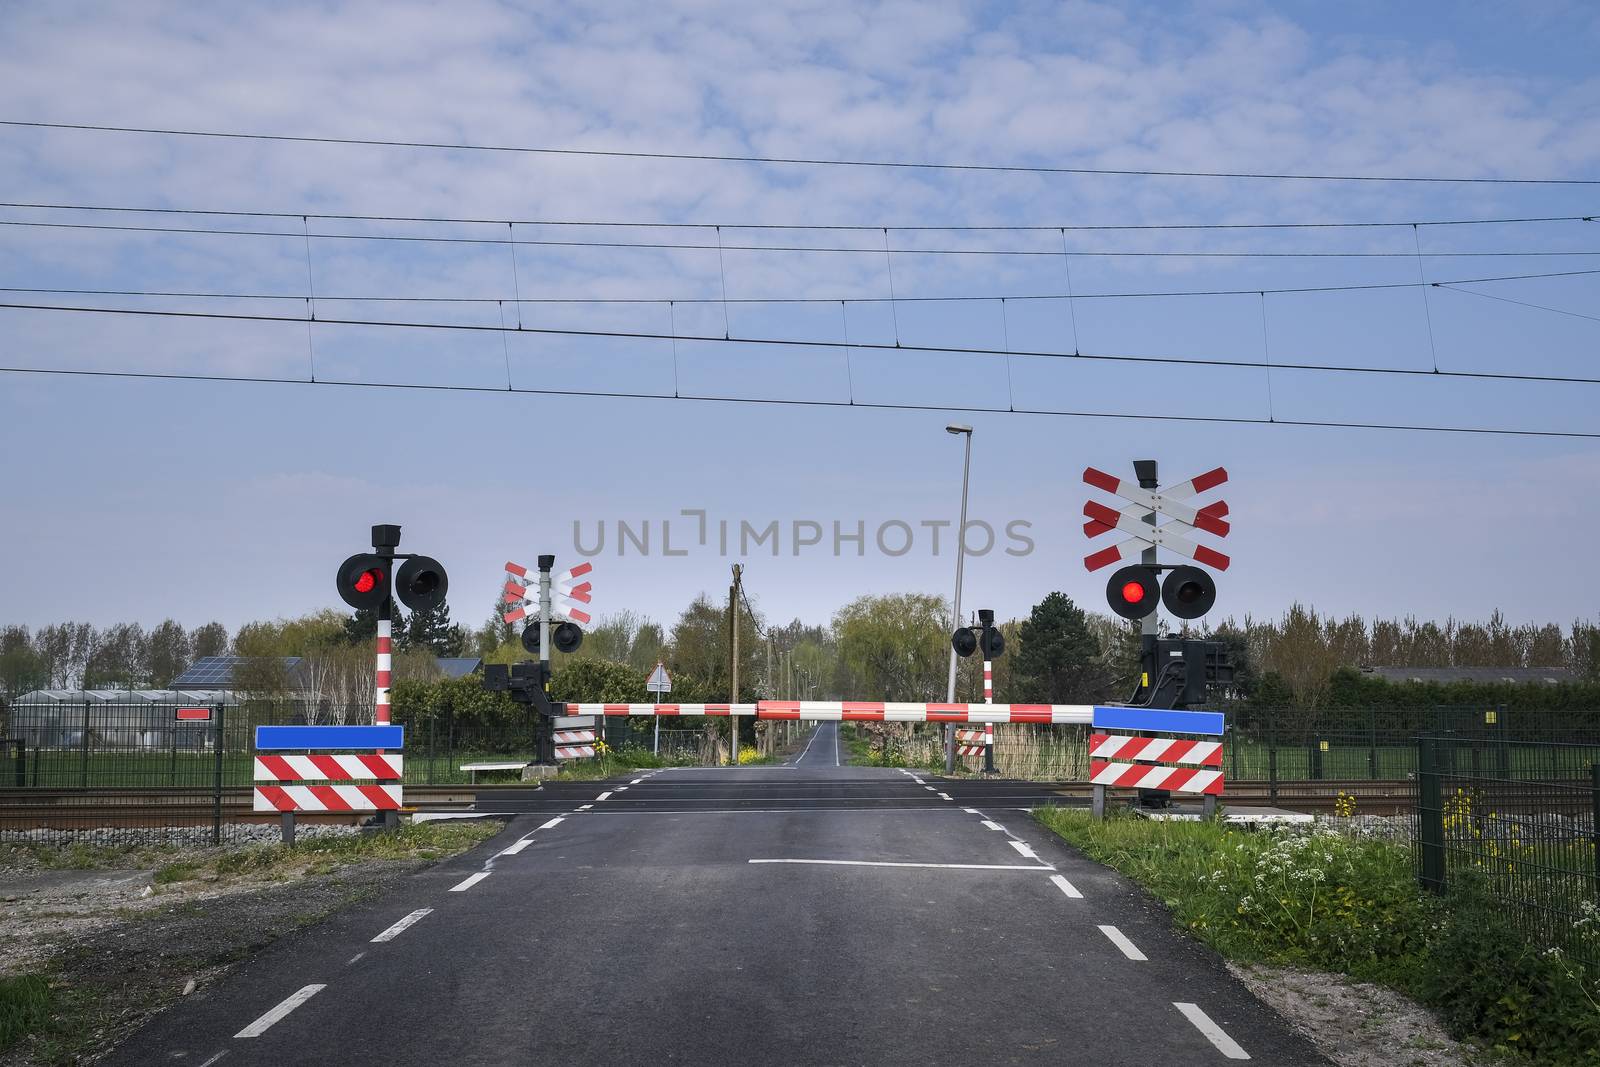 Road signs at the railway crossing with a barrier. Organization  by Tjeerdkruse